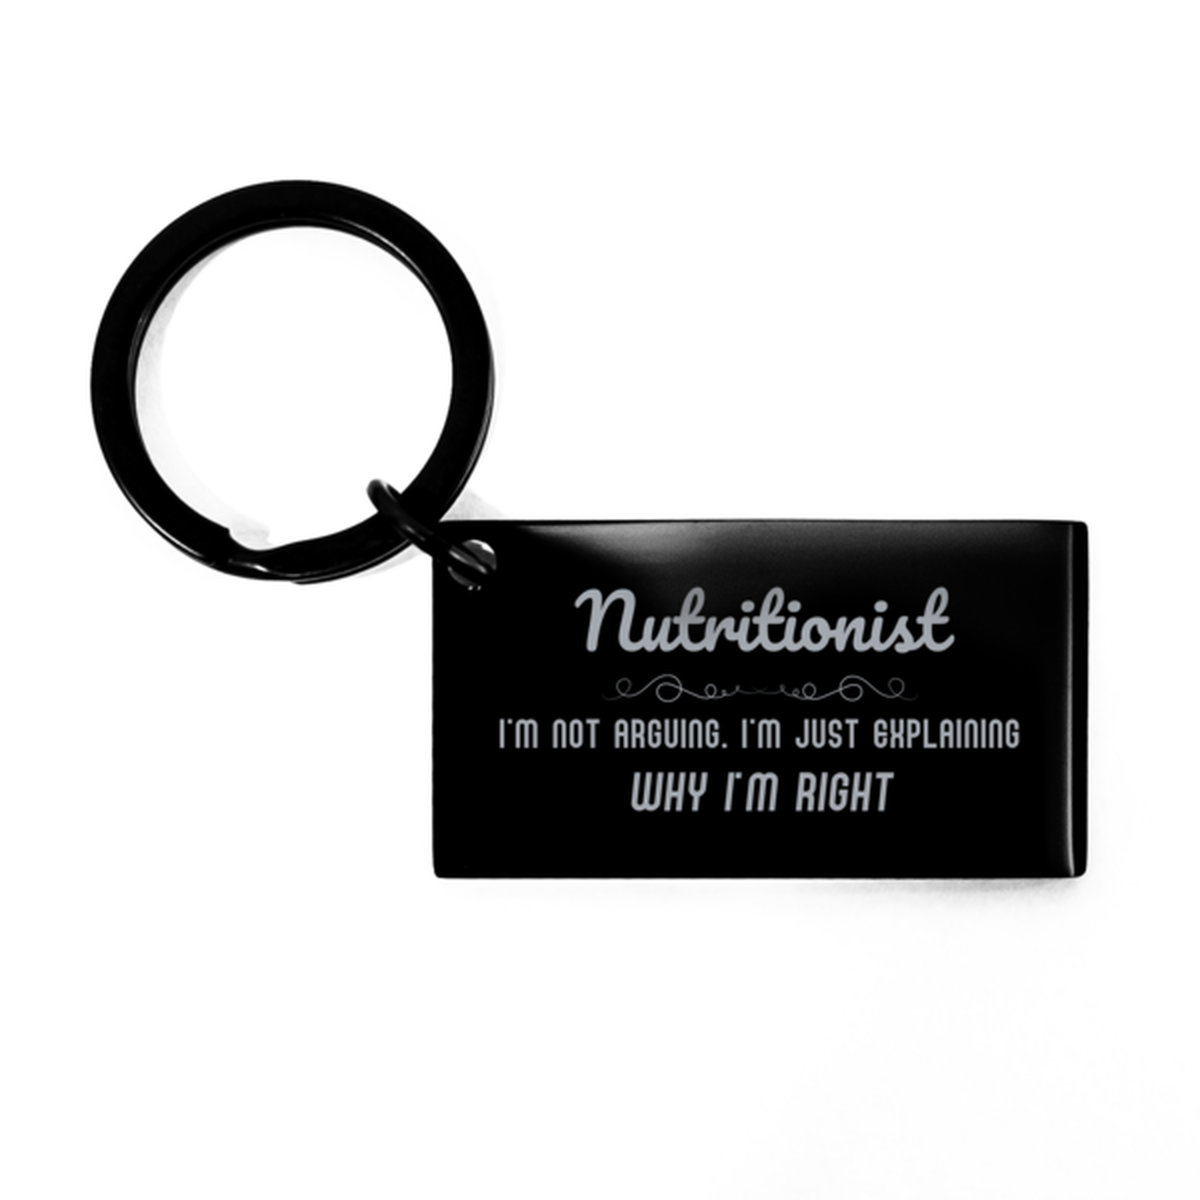 Nutritionist I'm not Arguing. I'm Just Explaining Why I'm RIGHT Keychain, Funny Saying Quote Nutritionist Gifts For Nutritionist Graduation Birthday Christmas Gifts for Men Women Coworker